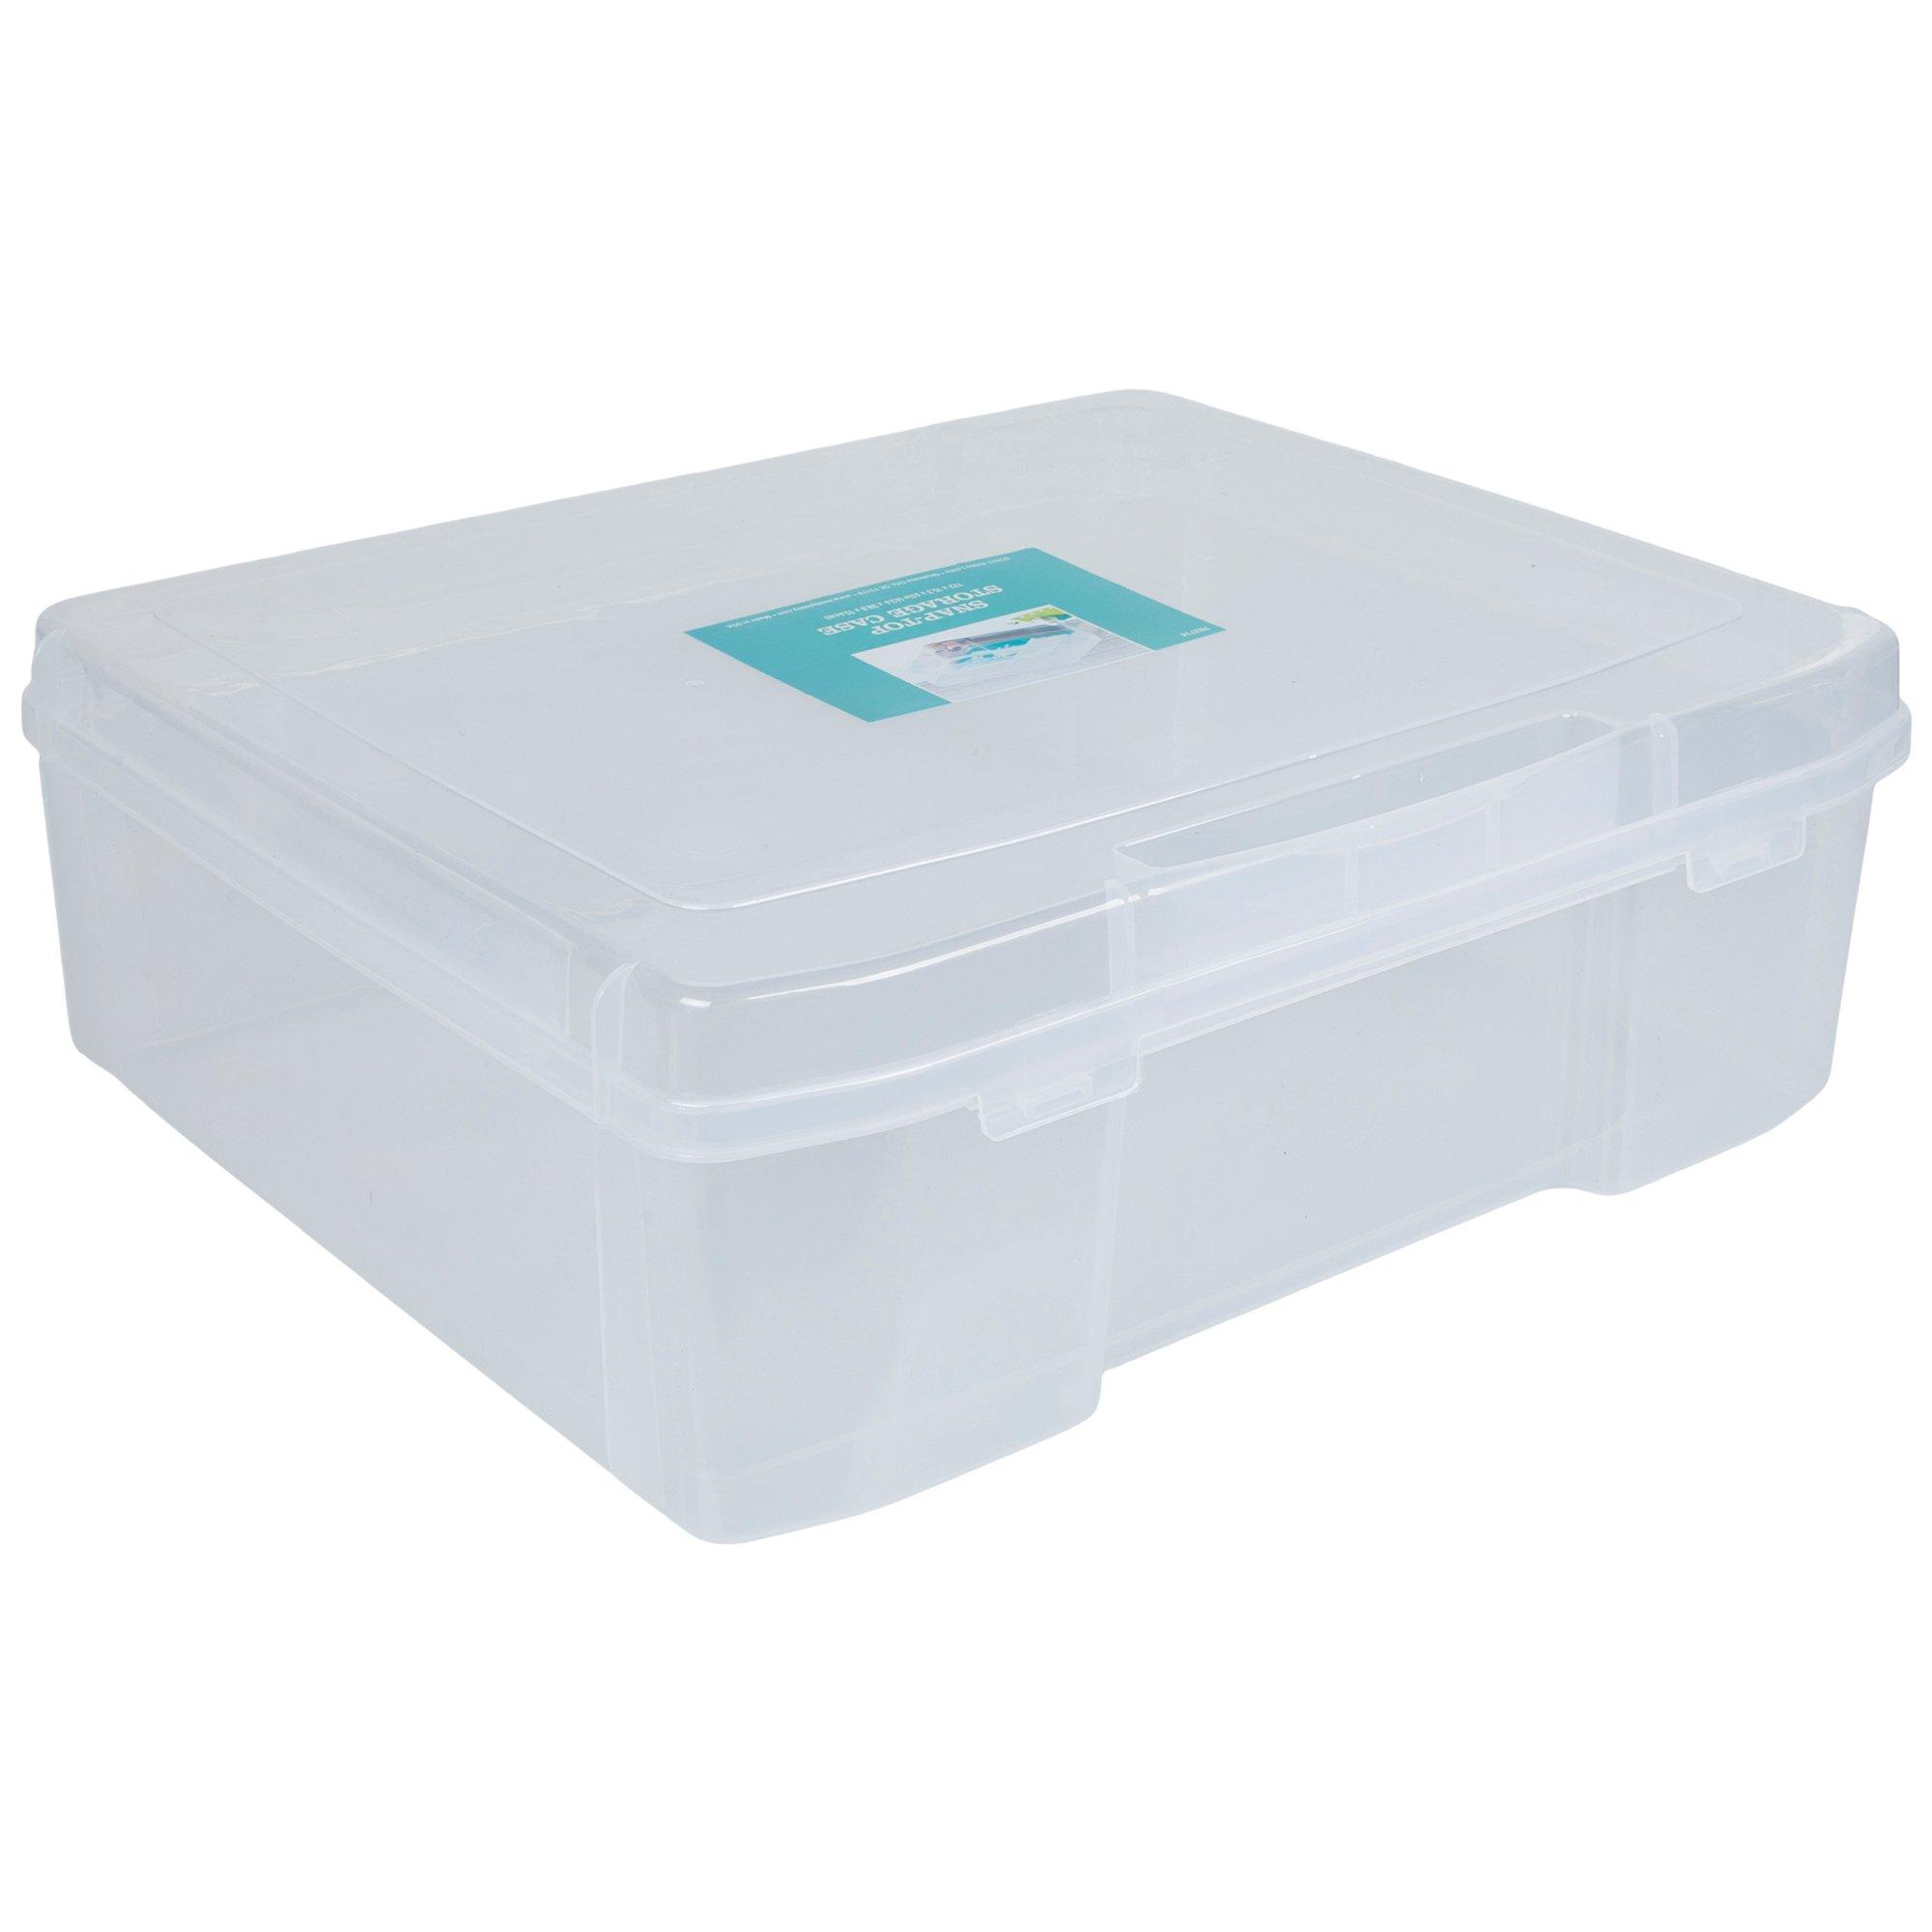 5 Liter Plastic Storage Box with Snap Lid by Top Notch - Plastic Storage - Storage & Organization